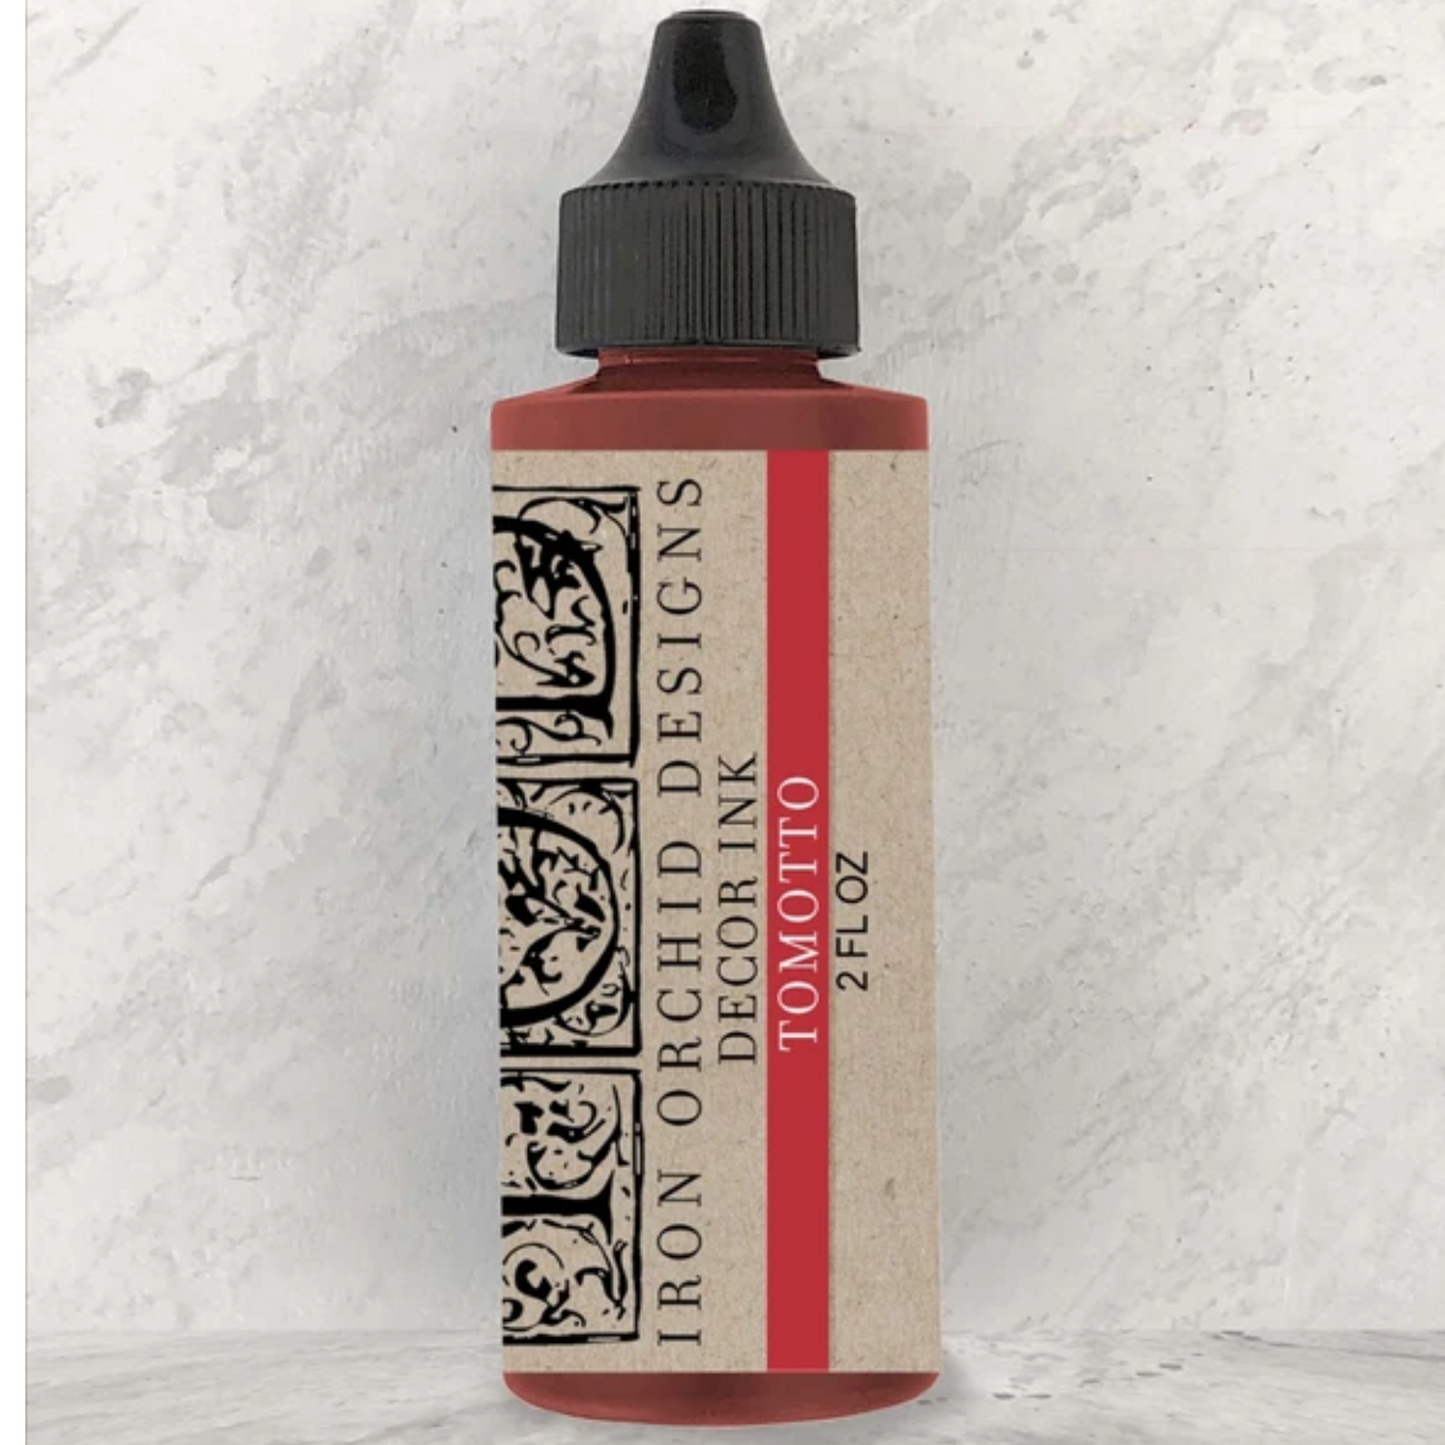 IOD Decor Ink Tomotto (red) 2oz bottle at Milton's Daughter